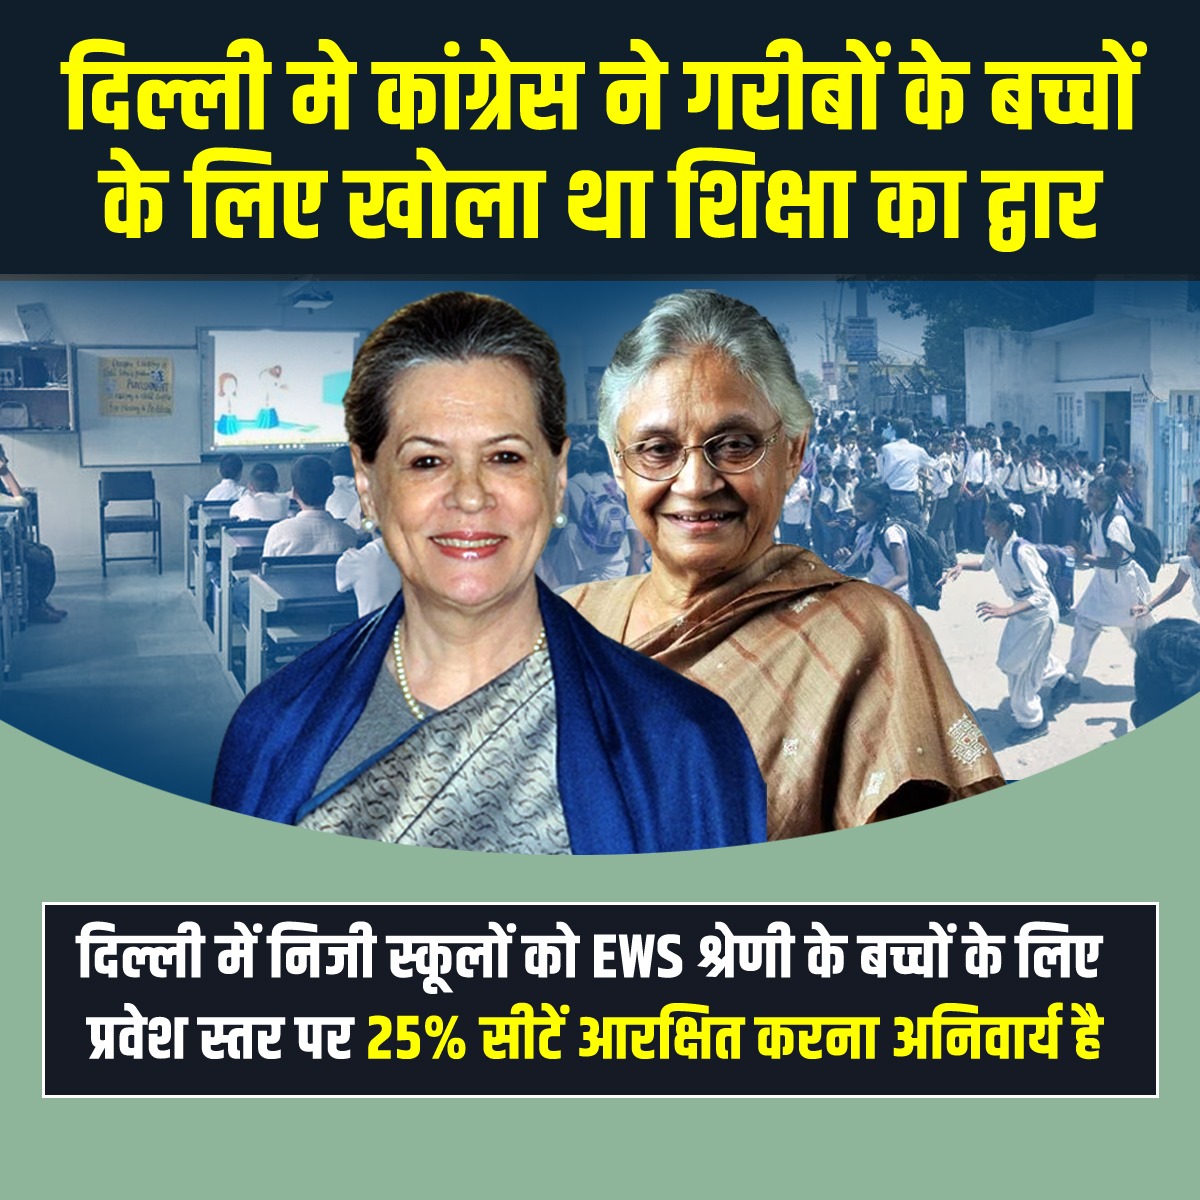 In Delhi, Congress had opened the doors of education for the children of the poor.
Private schools in Delhi are required to reserve 25% of their seats for students from EWS, disadvantaged groups, and children with special needs (CWSN)